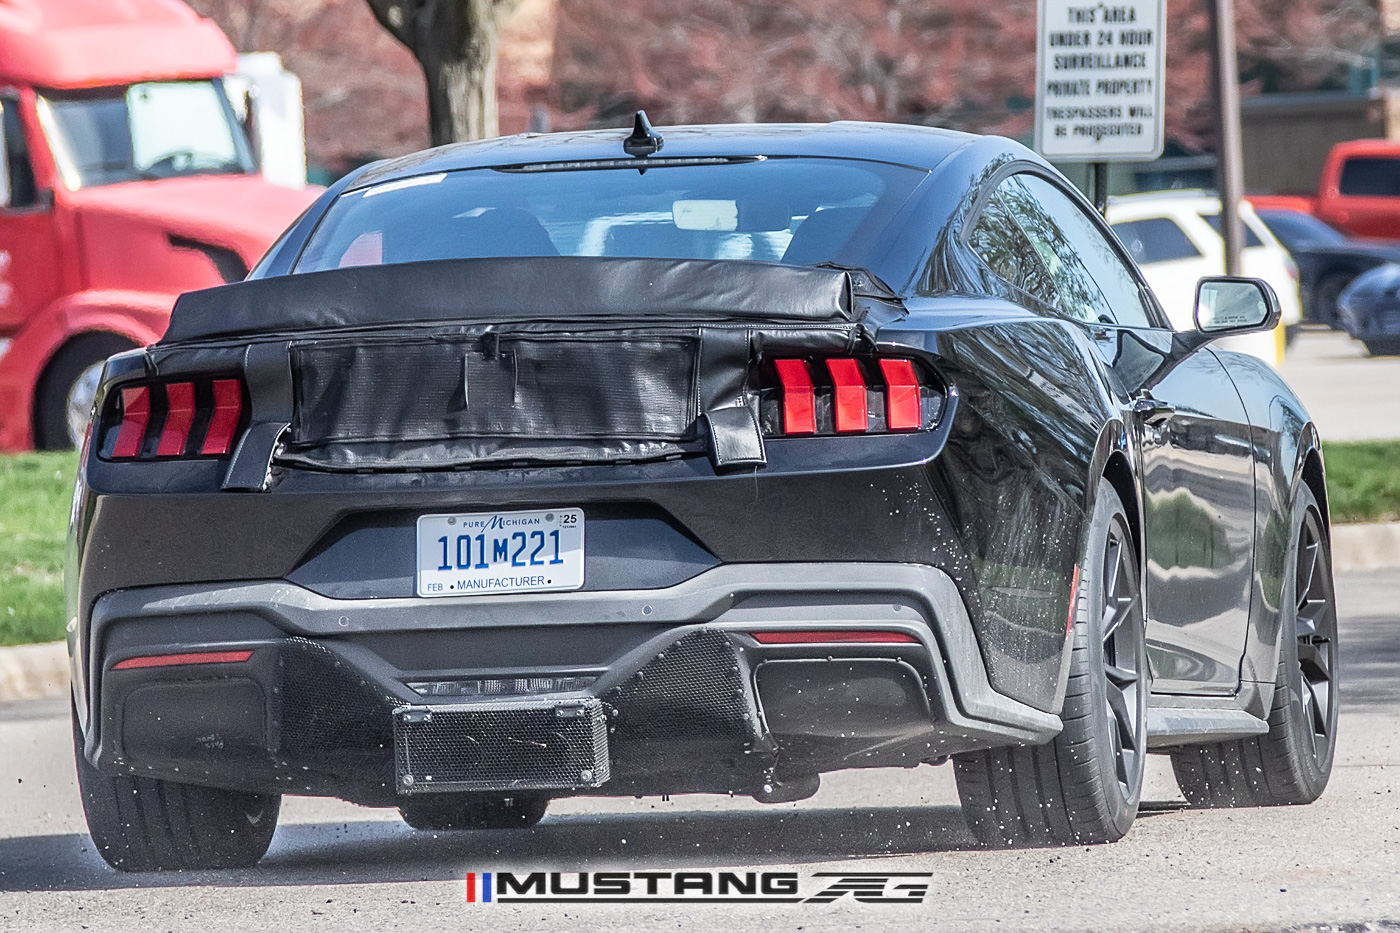 S650 Mustang 📸 Mustang GT3 Road-Version Prototype Spied Testing with Center-Exit Exhaust s650-mustang-variant-prototype-center-exit-exhaust-15